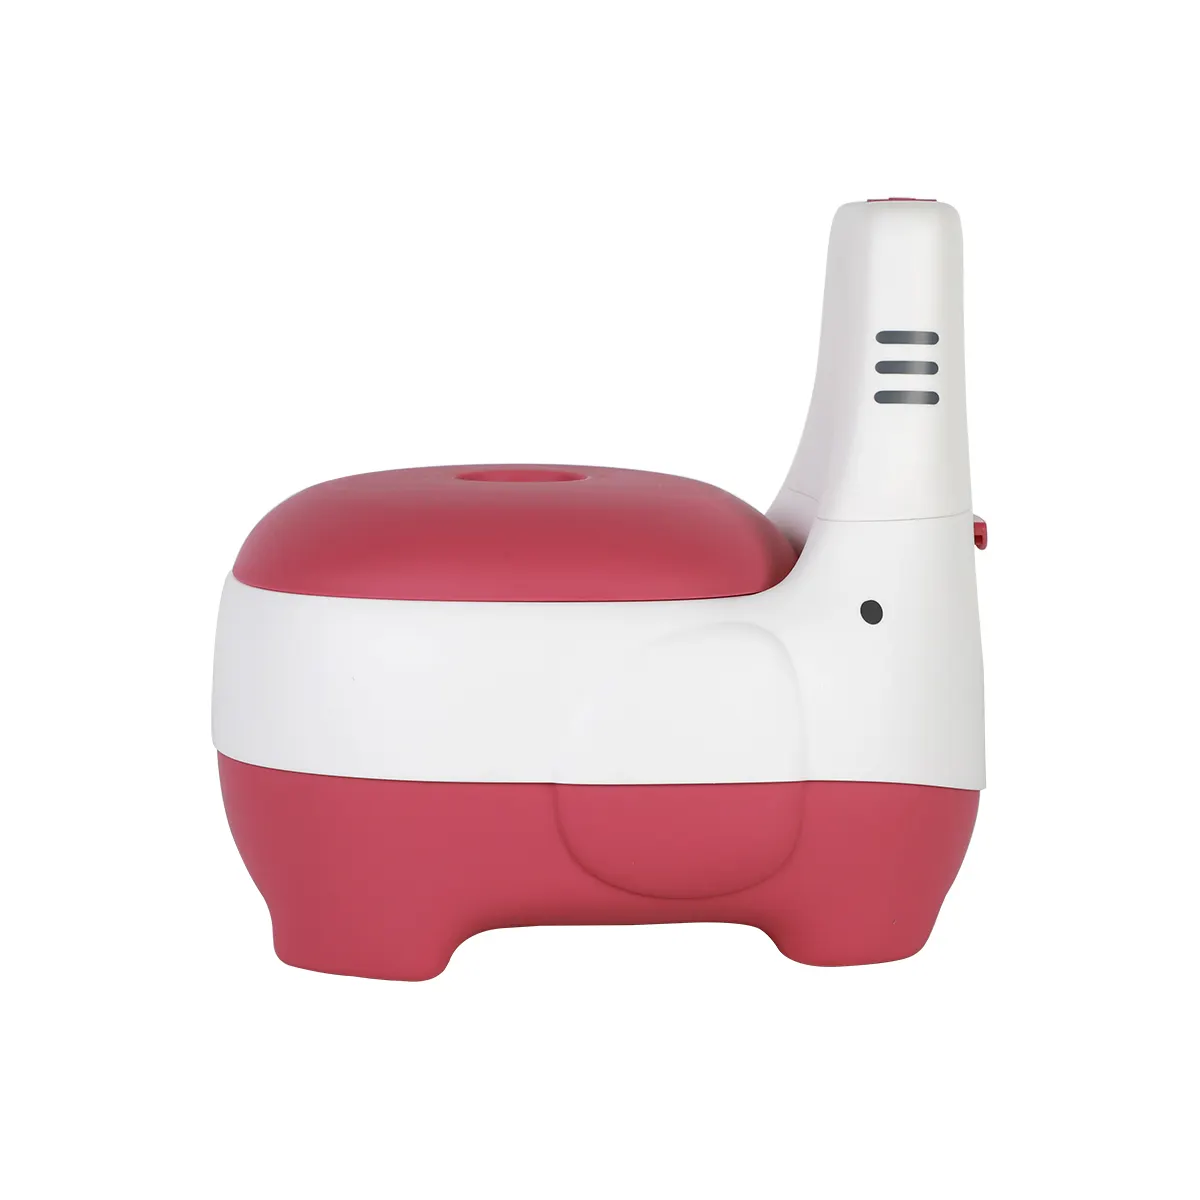 Home Use Simple Portable Baby Potty Training Chair Bathroom Baby Potty Chair Kids Toilet Training